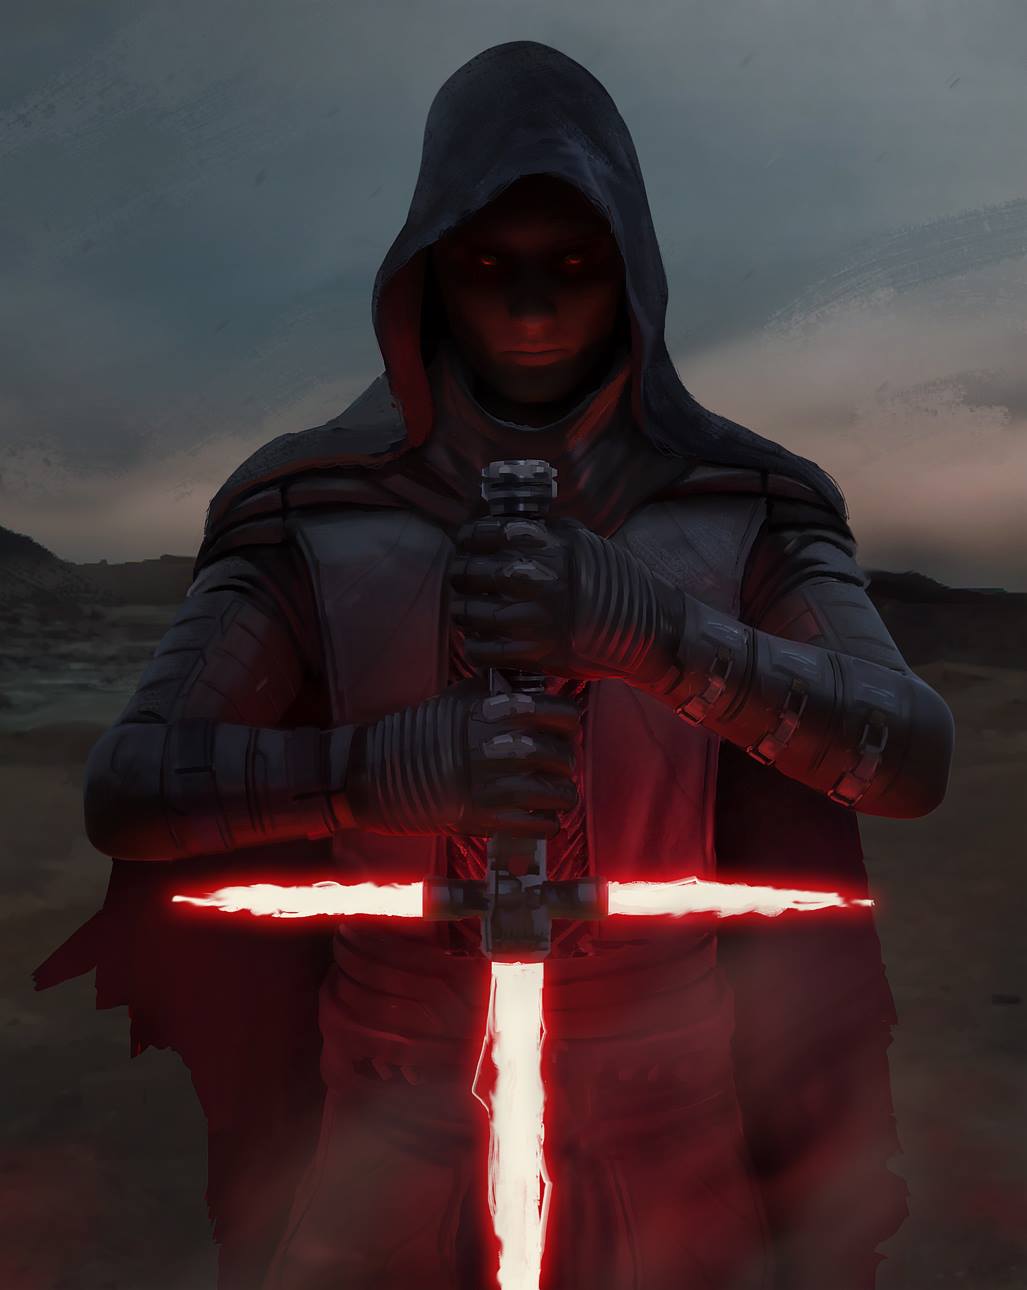 Sith lord ep7 FAN ART by jamga on